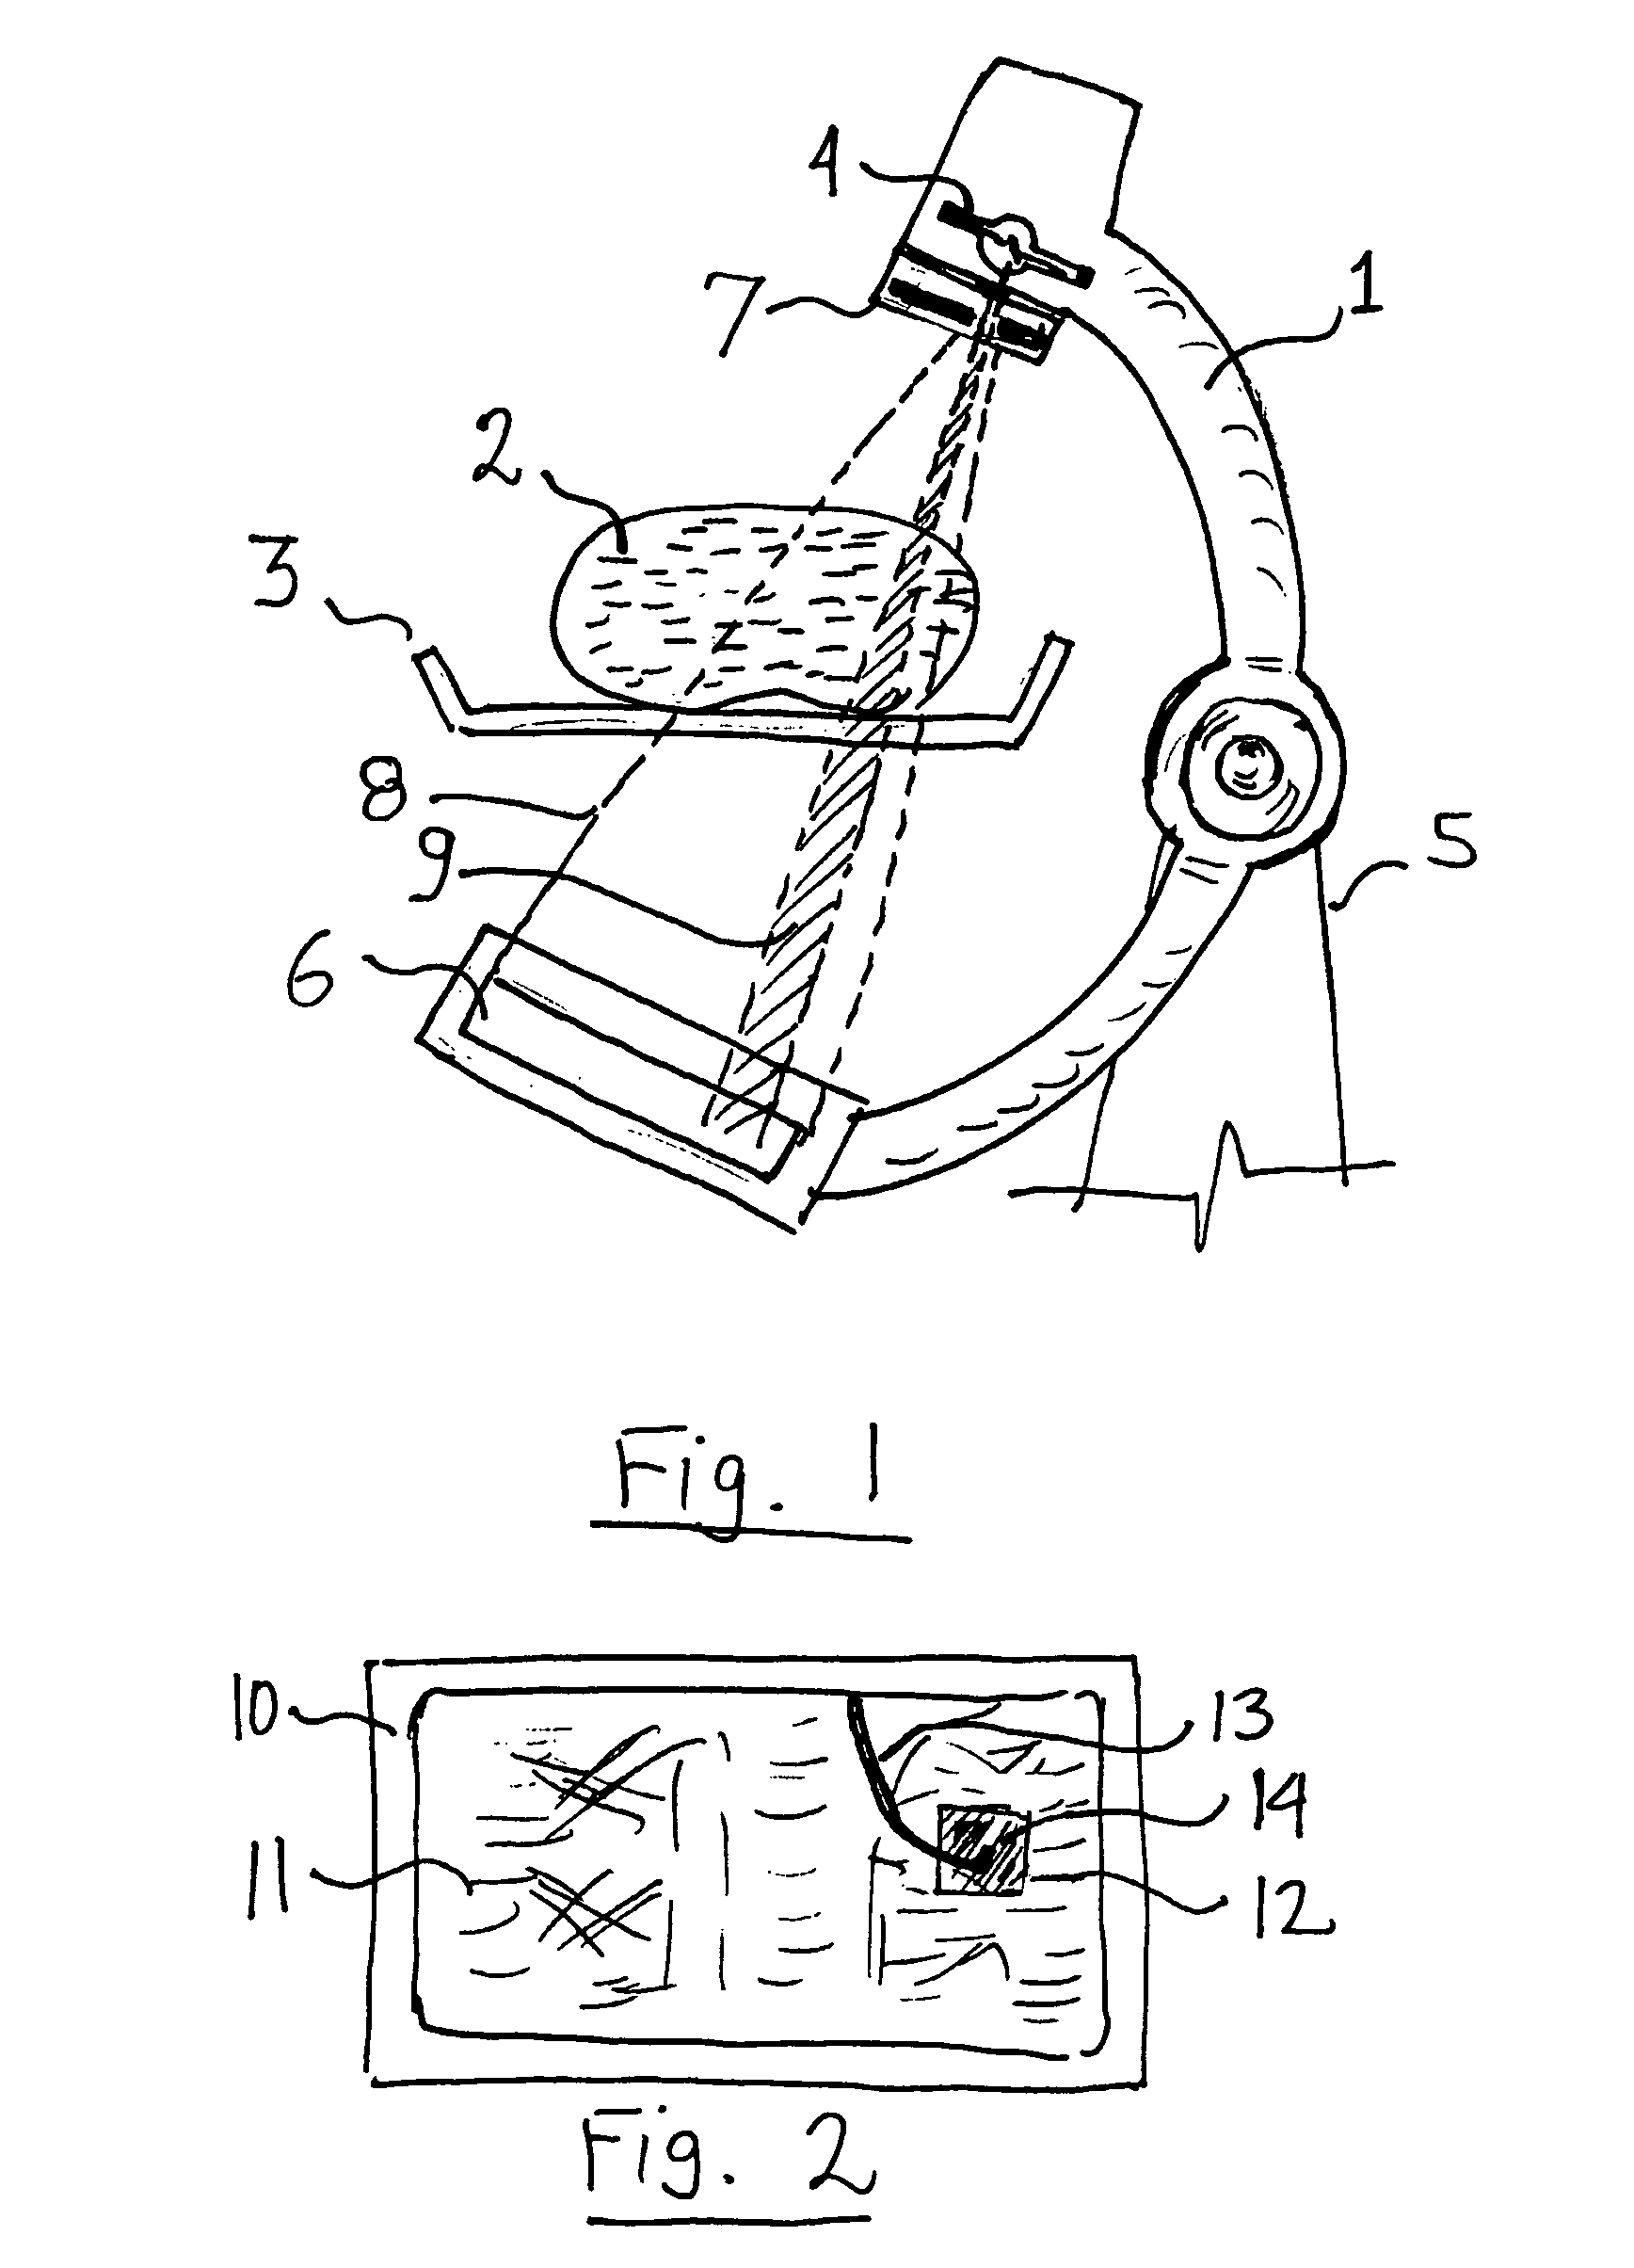 System for reduction of exposure to X-ray radiation